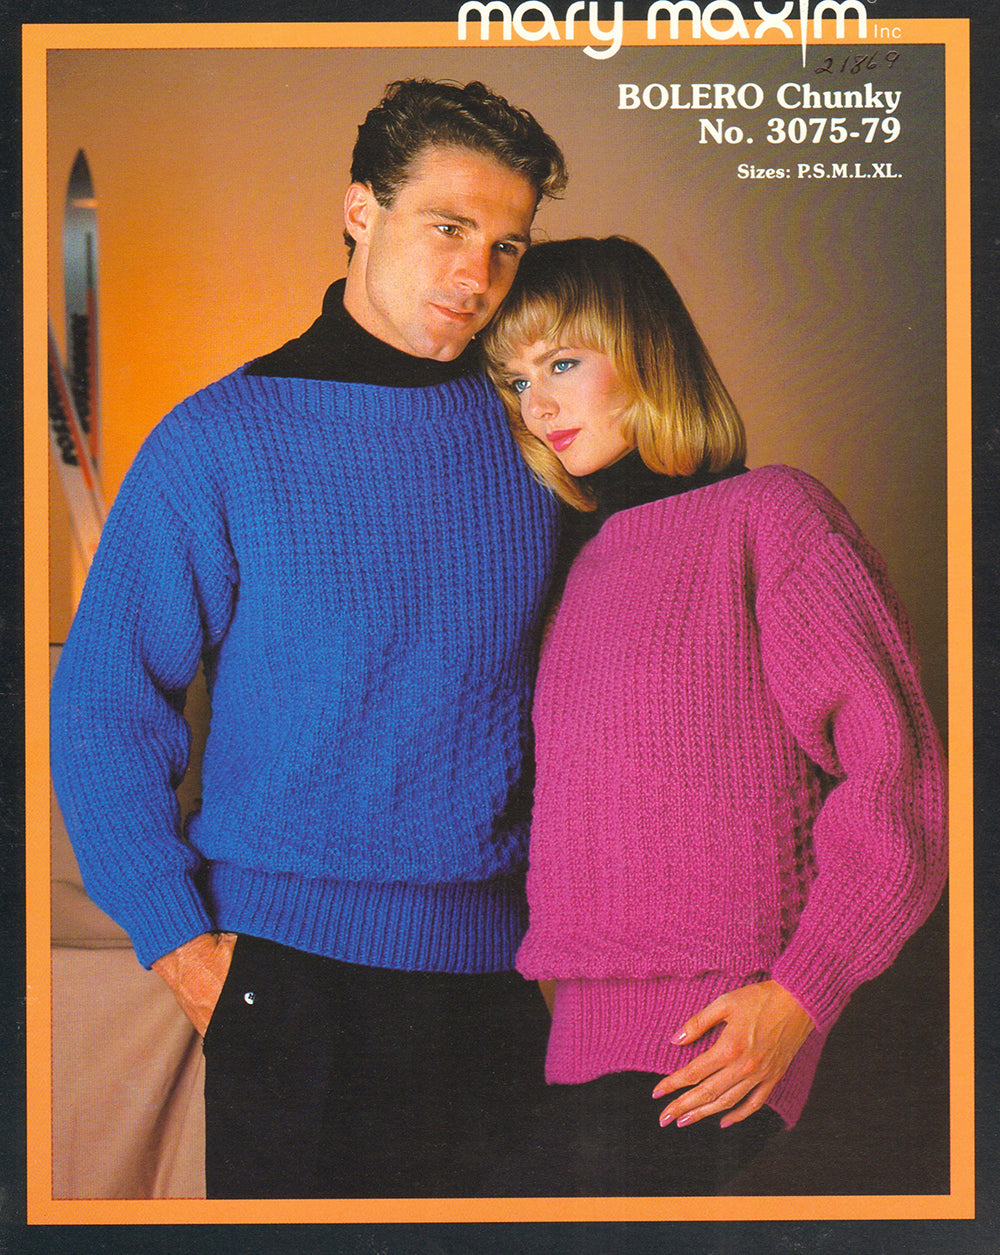 His And Hers Diagonal Sweater Pattern